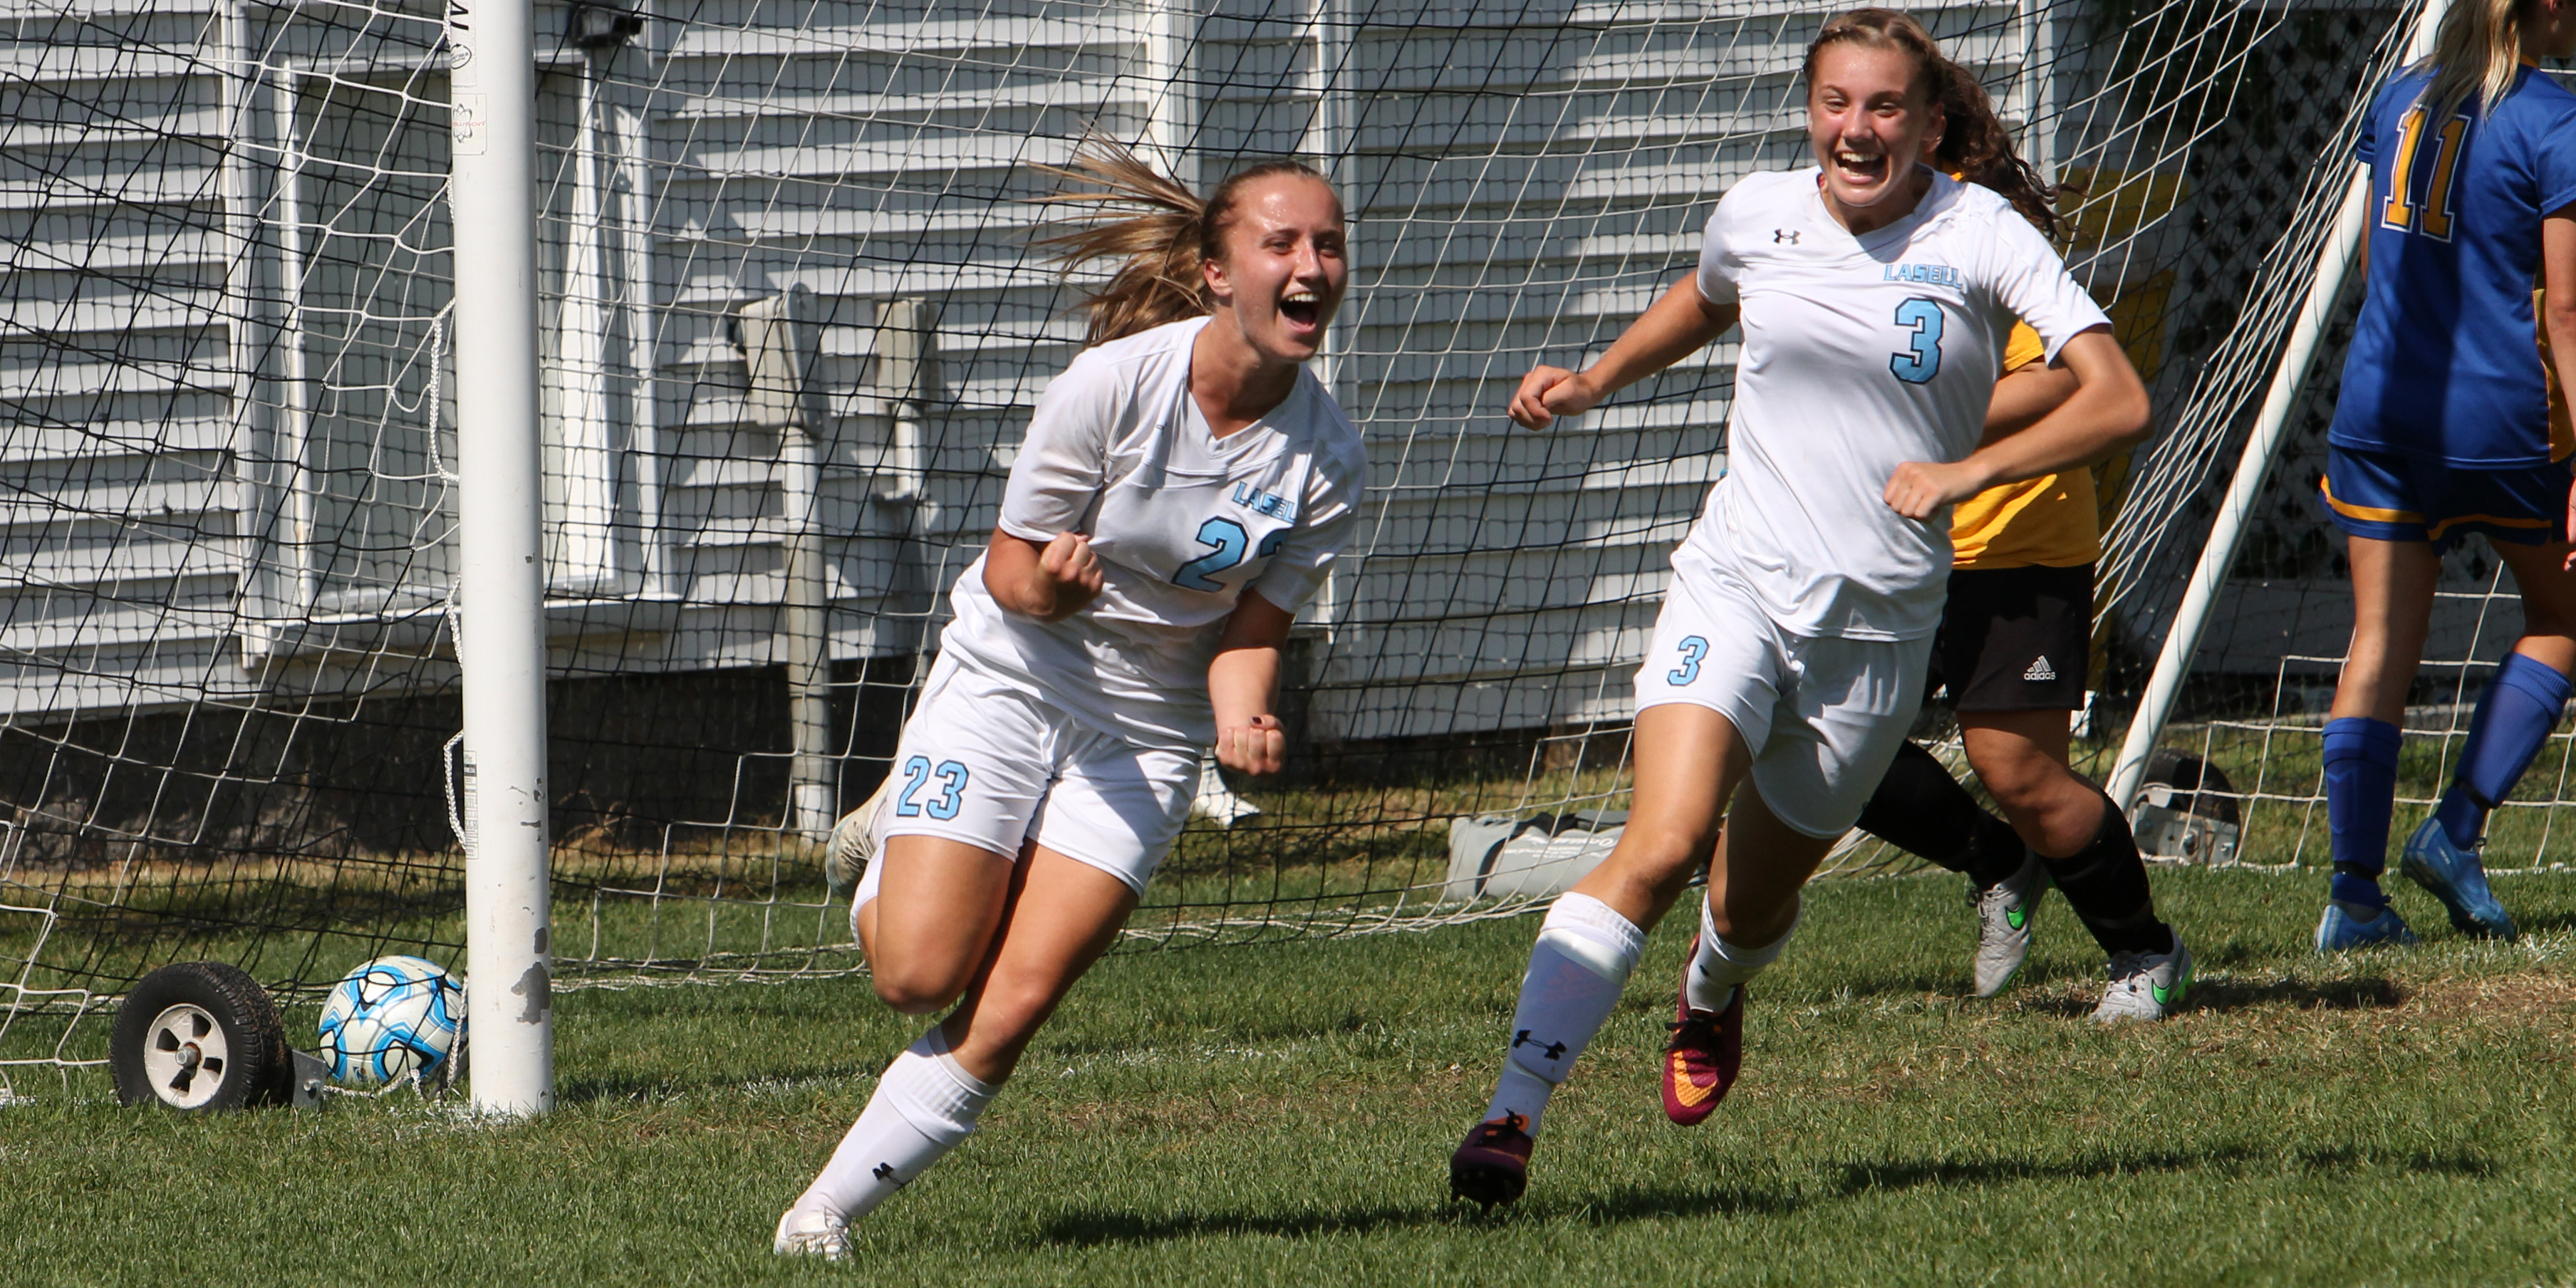 Women's Soccer Finishes Atop GNAC with 4-1 Win at Rivier